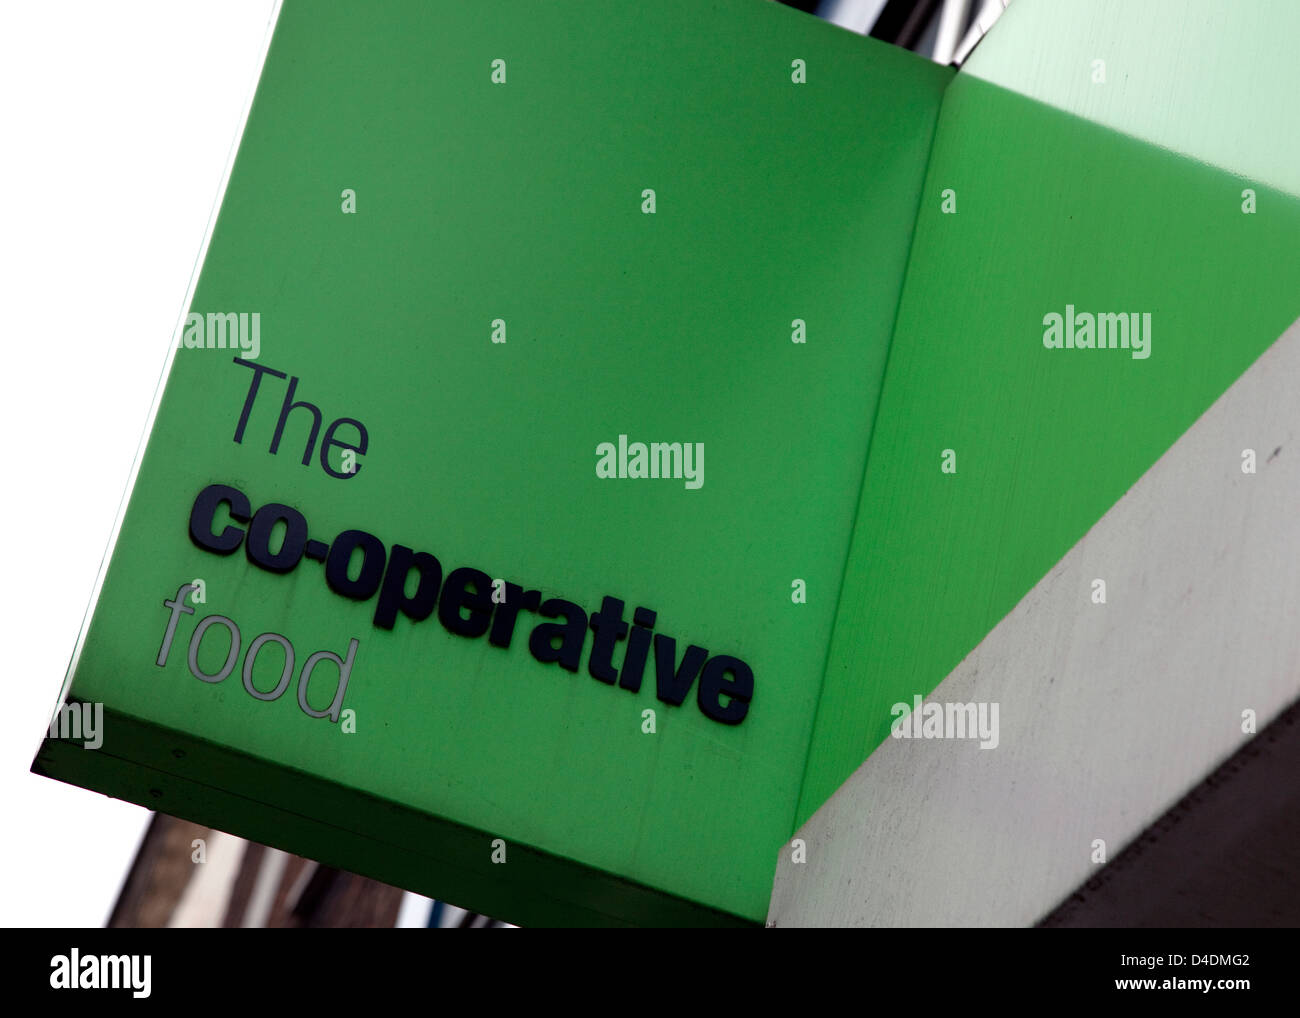 Co-Operative food supermarket in London Stock Photo